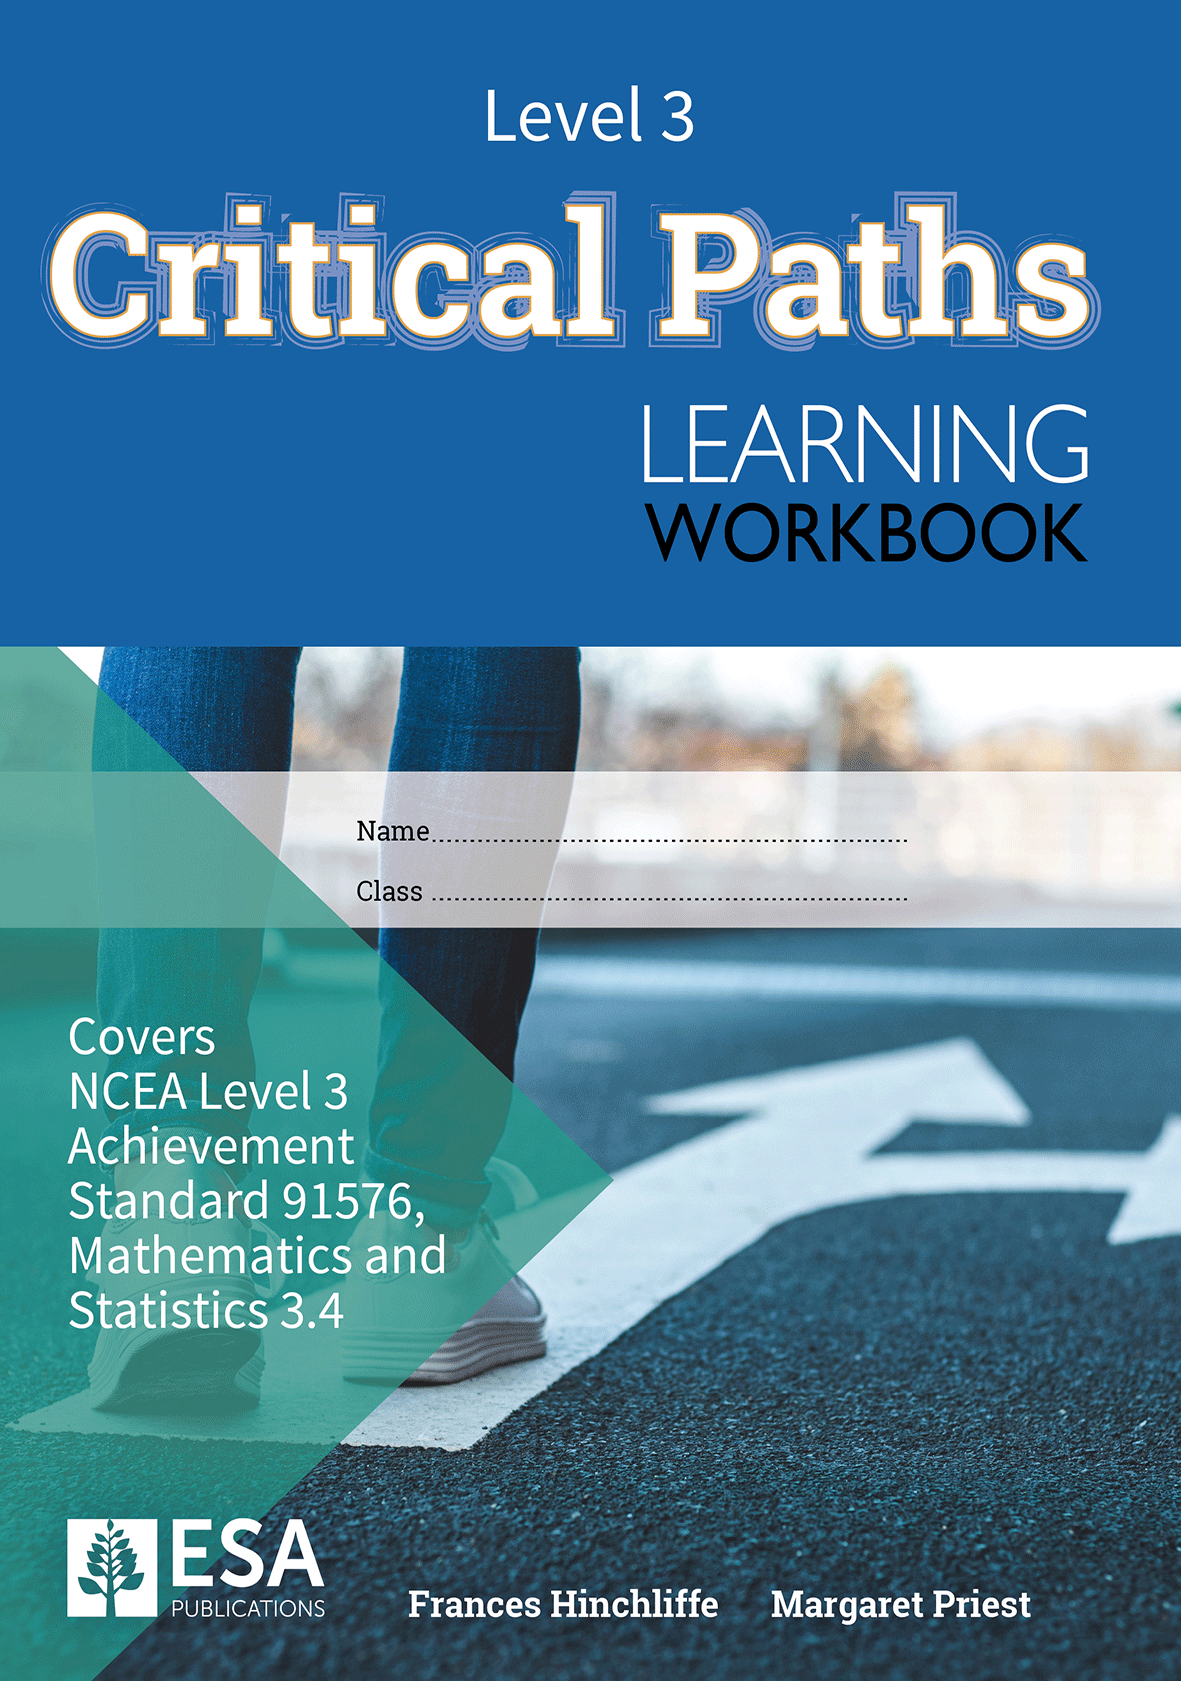 Level 3 Critical Paths 3.4 Learning Workbook